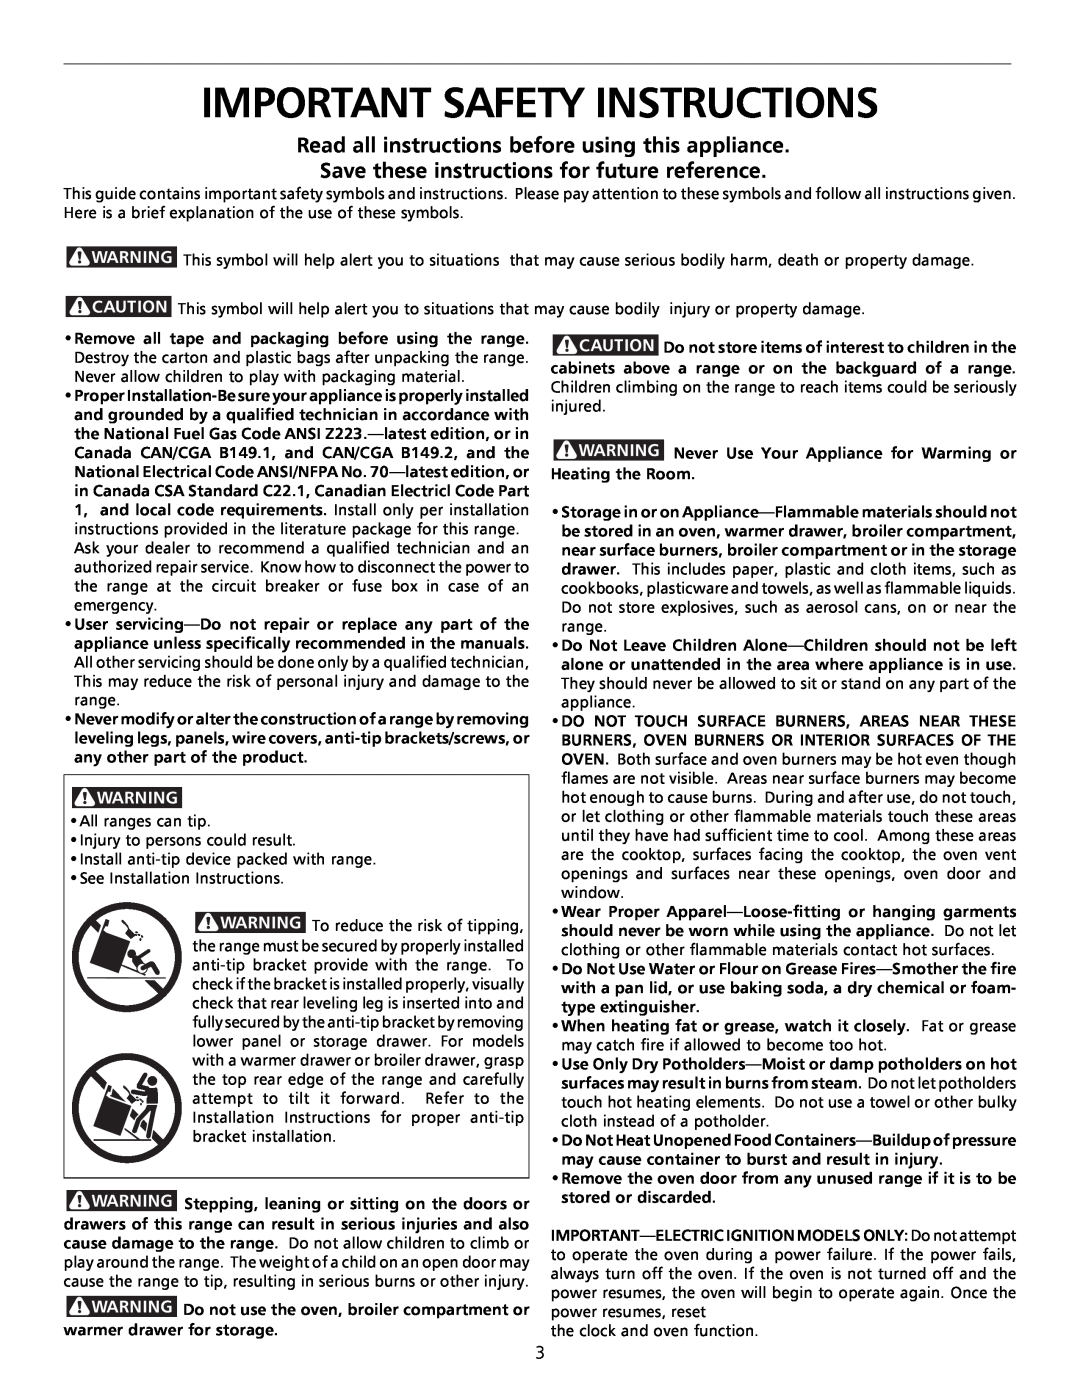 Tappan 316000181 Important Safety Instructions, Read all instructions before using this appliance 